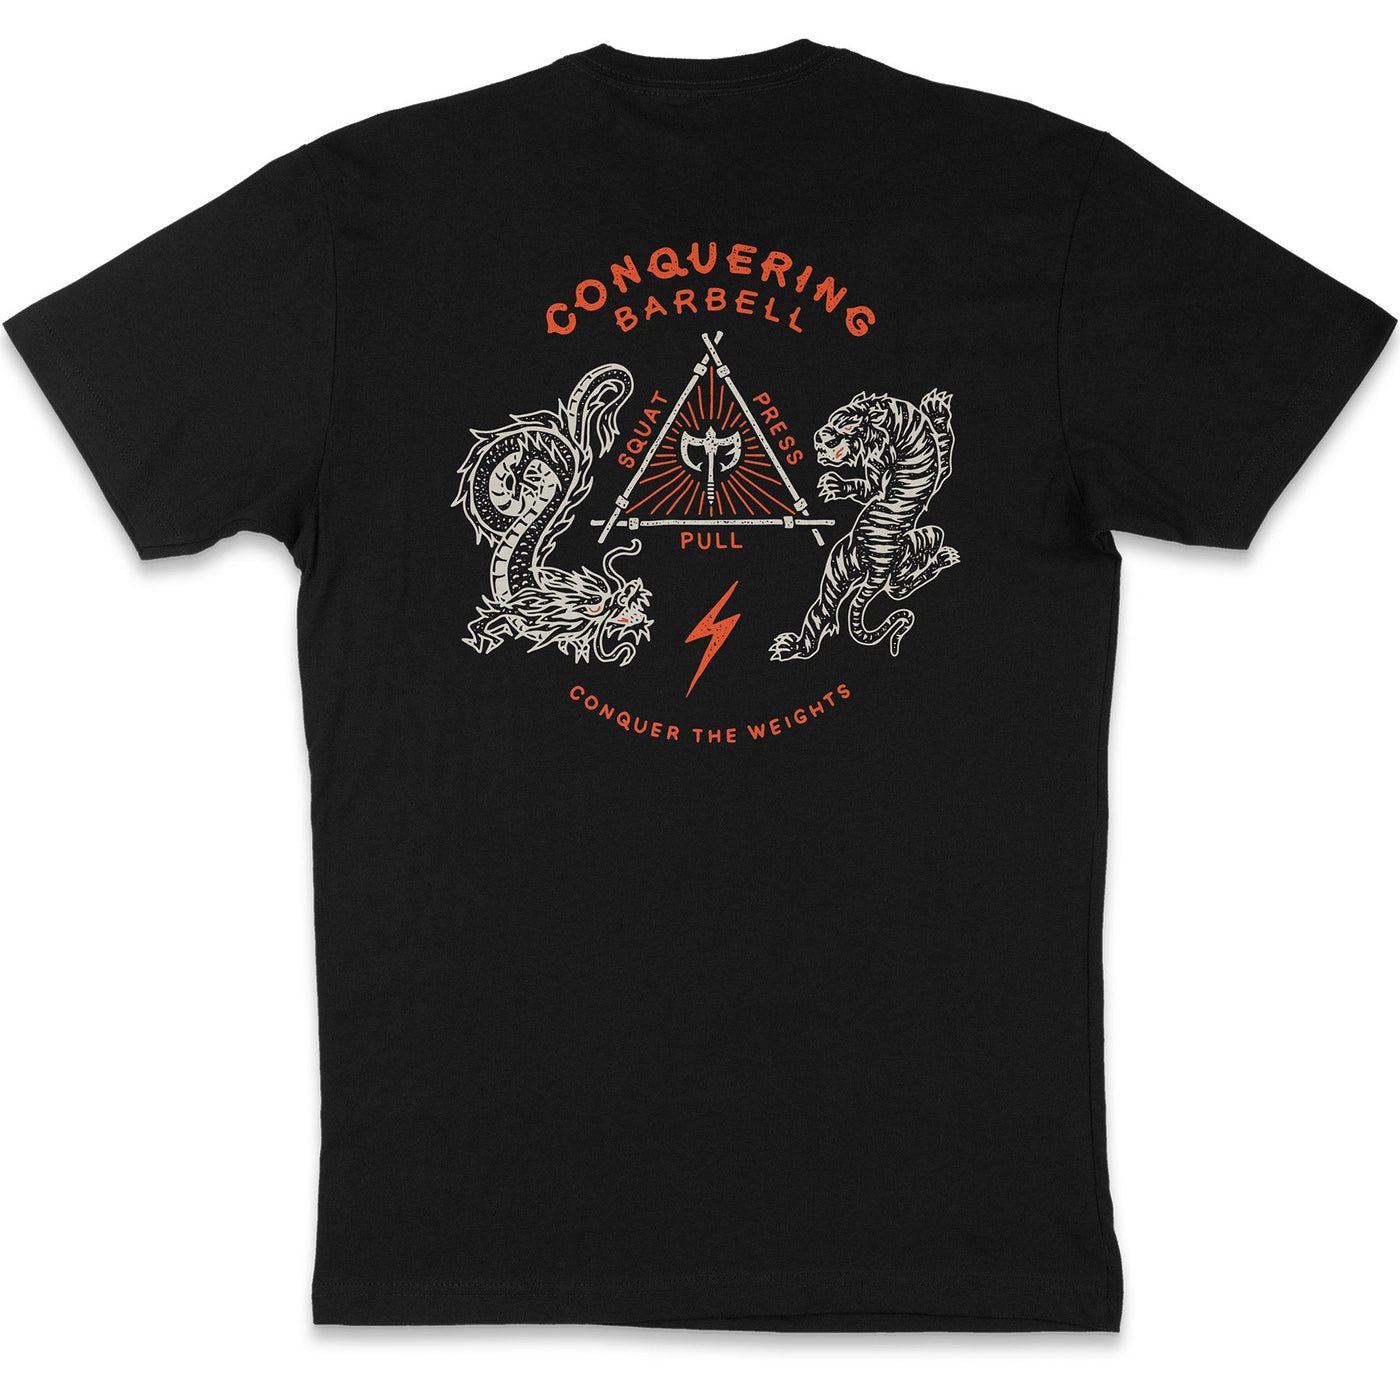 The Balance of Power - Black Tee - Conquering Barbell